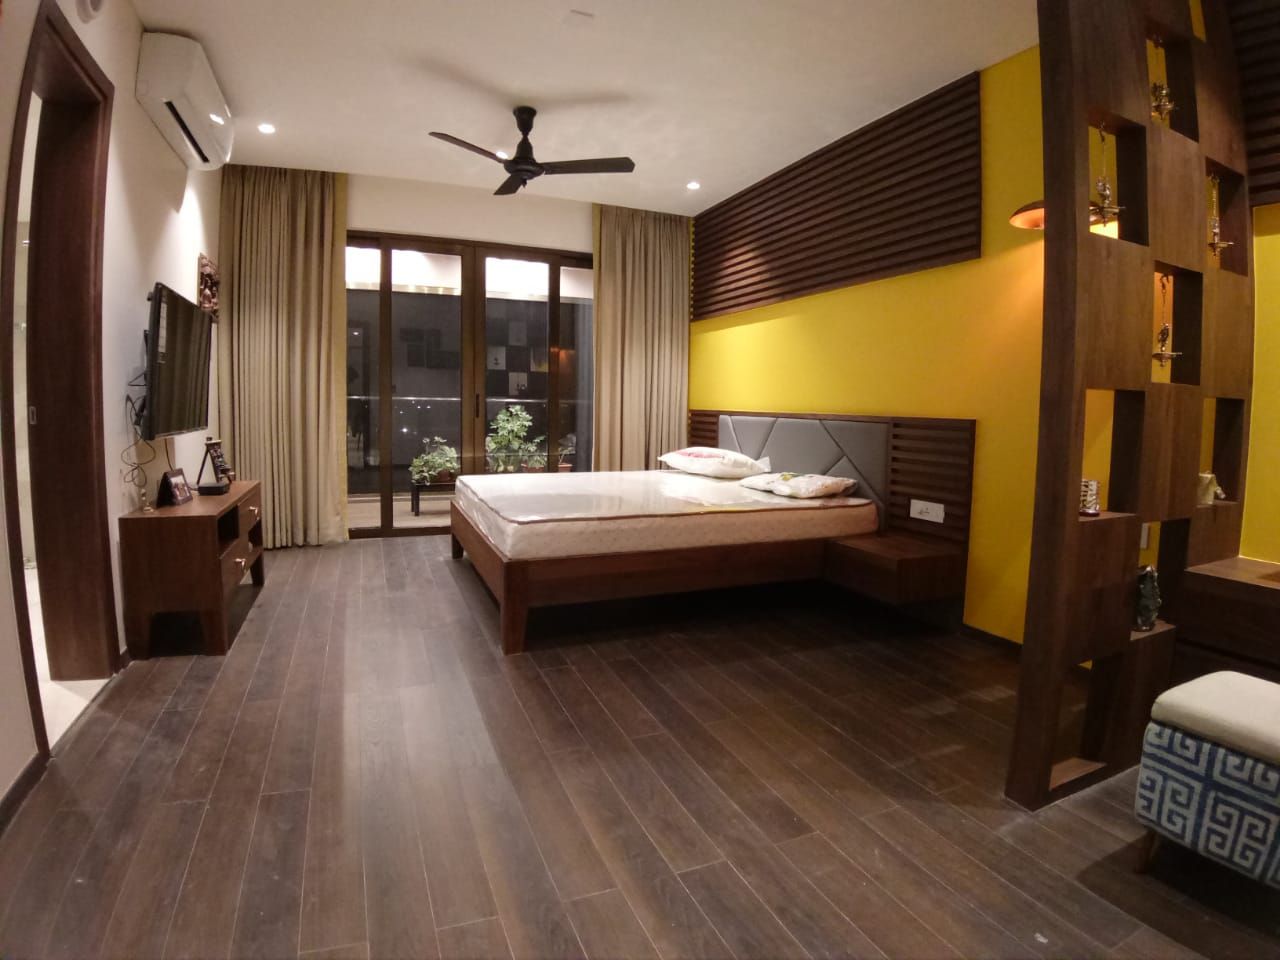 Interior work of 4.5 BHK apartment in kharadi, pune, Exemplary Services Exemplary Services ห้องนอน